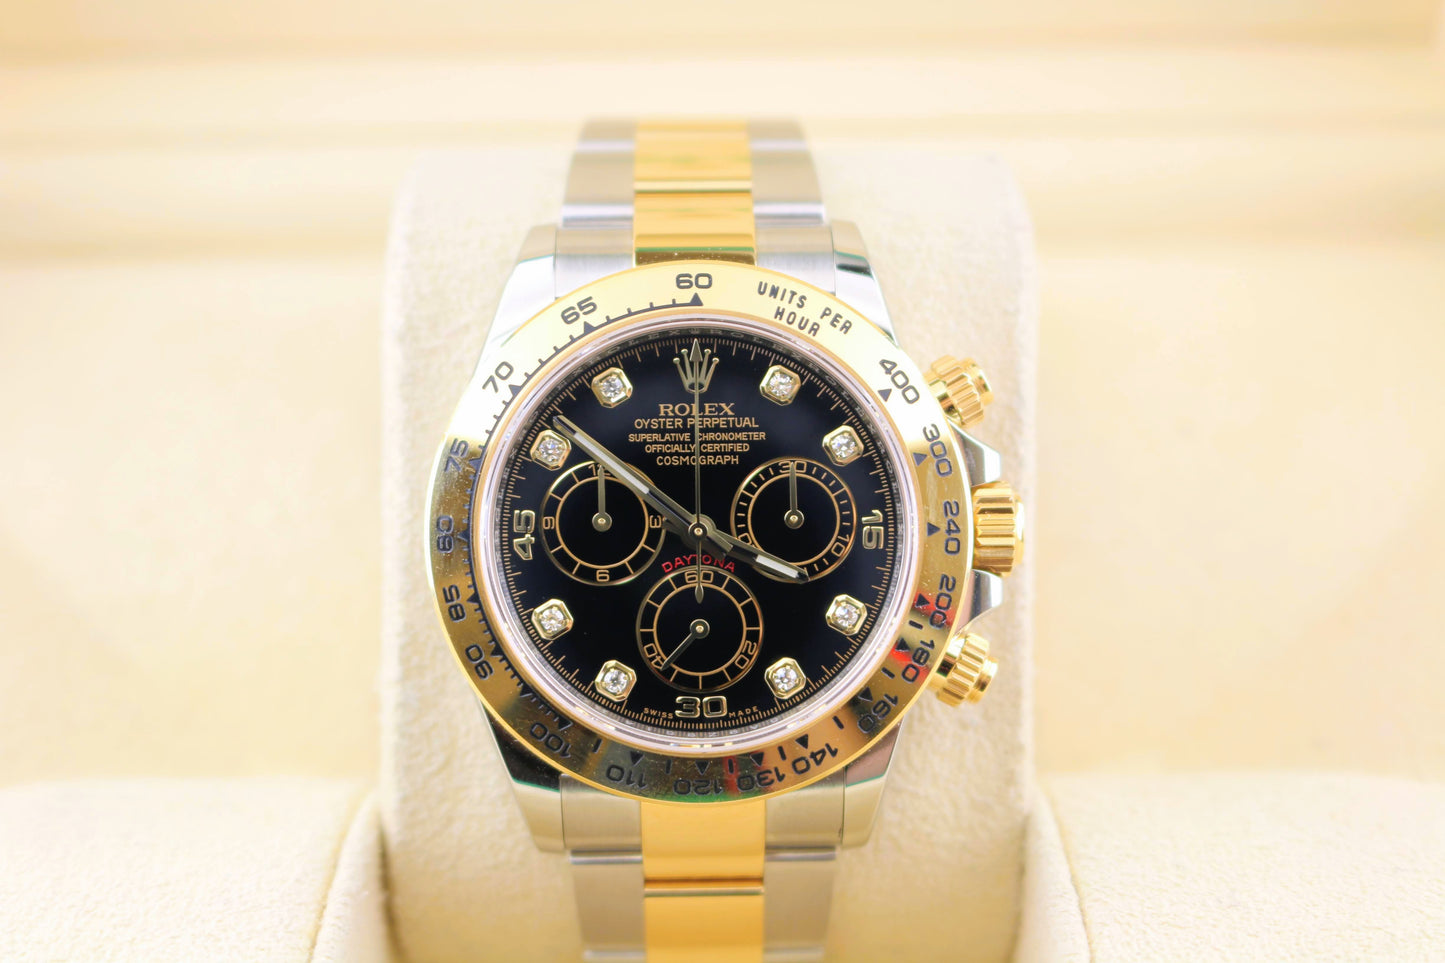 OH Rolex Daytona 116503 Black Diamond Dial TT Oyster With Papers 40mm